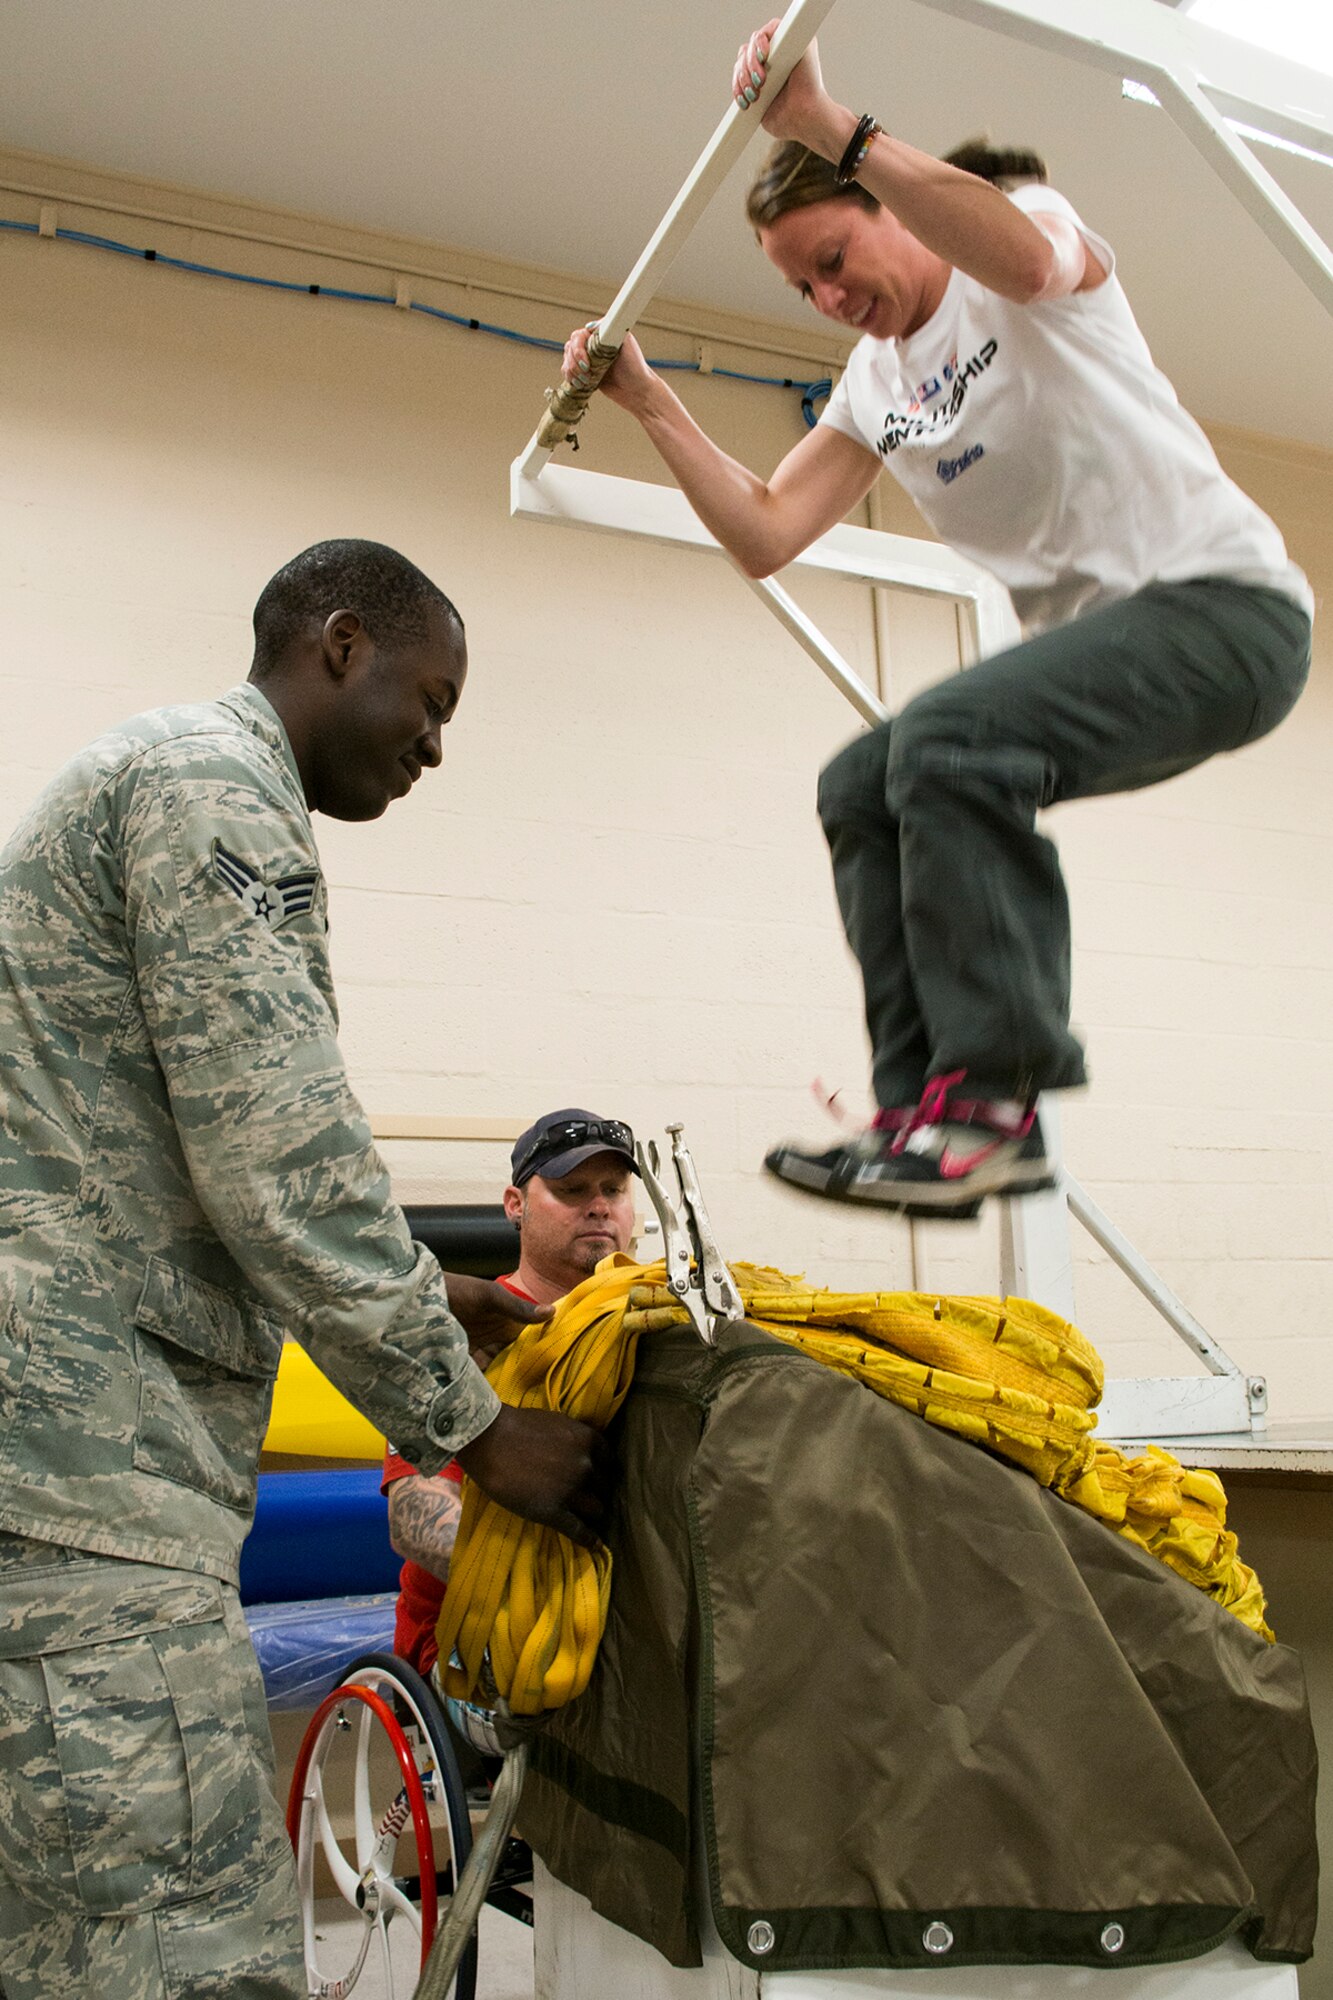 Emily Cook, a U.S. Olympic skier, tries to pack a B-52H Stratofortress drag chute during a tour of the 307th Operations Support Flight, June 4, 2014, Barksdale Air Force Base, La. Cook visited Barksdale with the American300 Tours to help connect servicemen and women with the people whose freedom they ensure. (U.S. Air Force photo by Master Sgt. Greg Steele/Released)